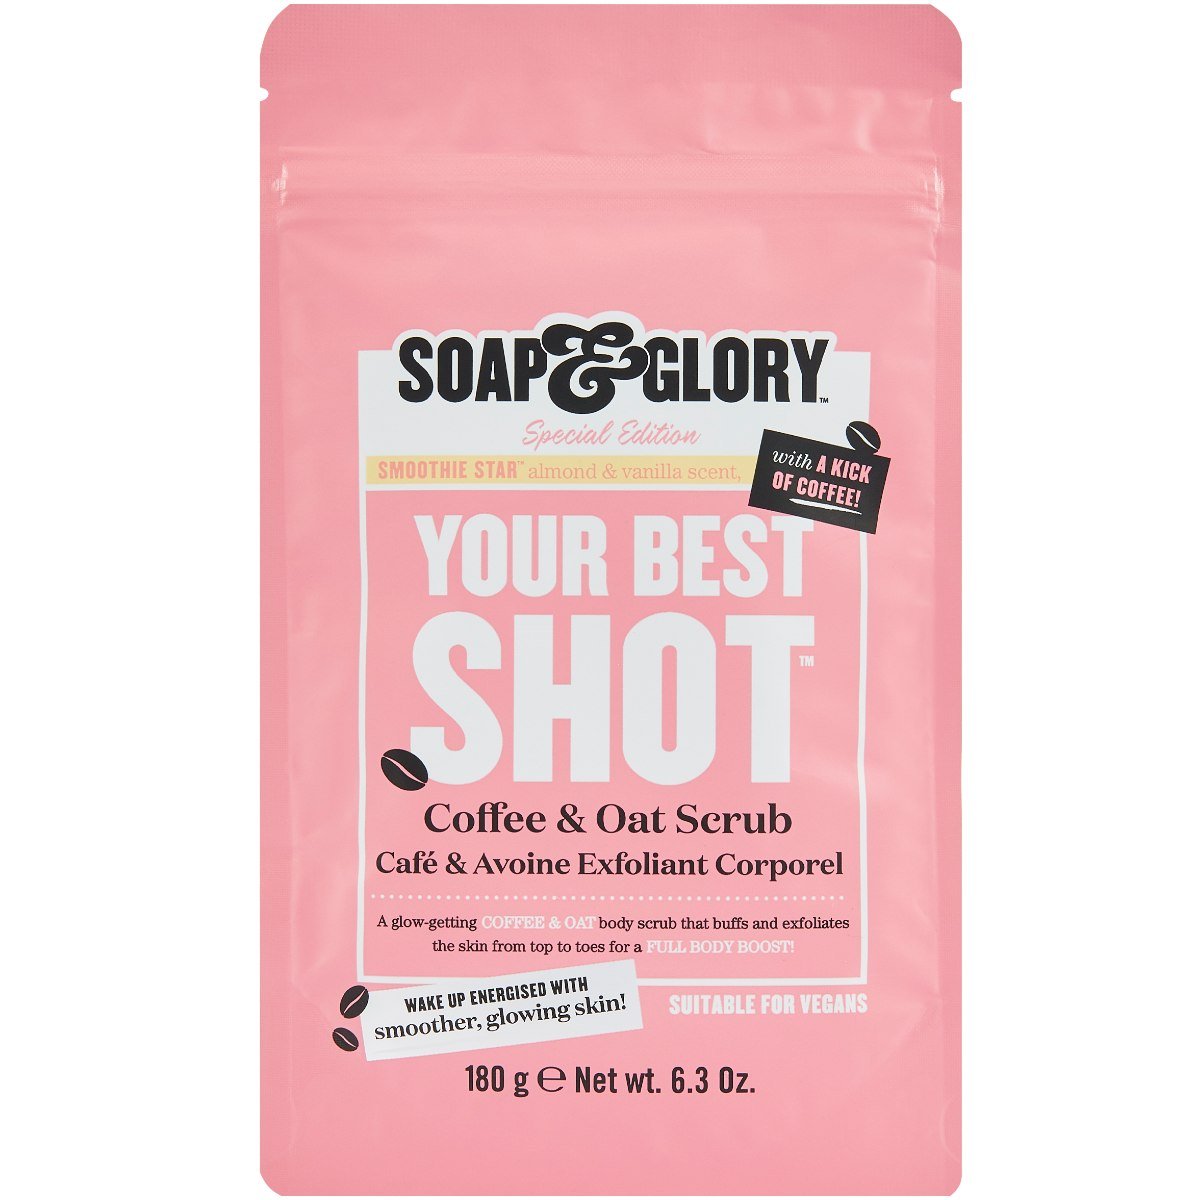 Soap & Glory Your Best Shot Coffee And Oat Scrub 180G - AllurebeautypkSoap & Glory Your Best Shot Coffee And Oat Scrub 180G